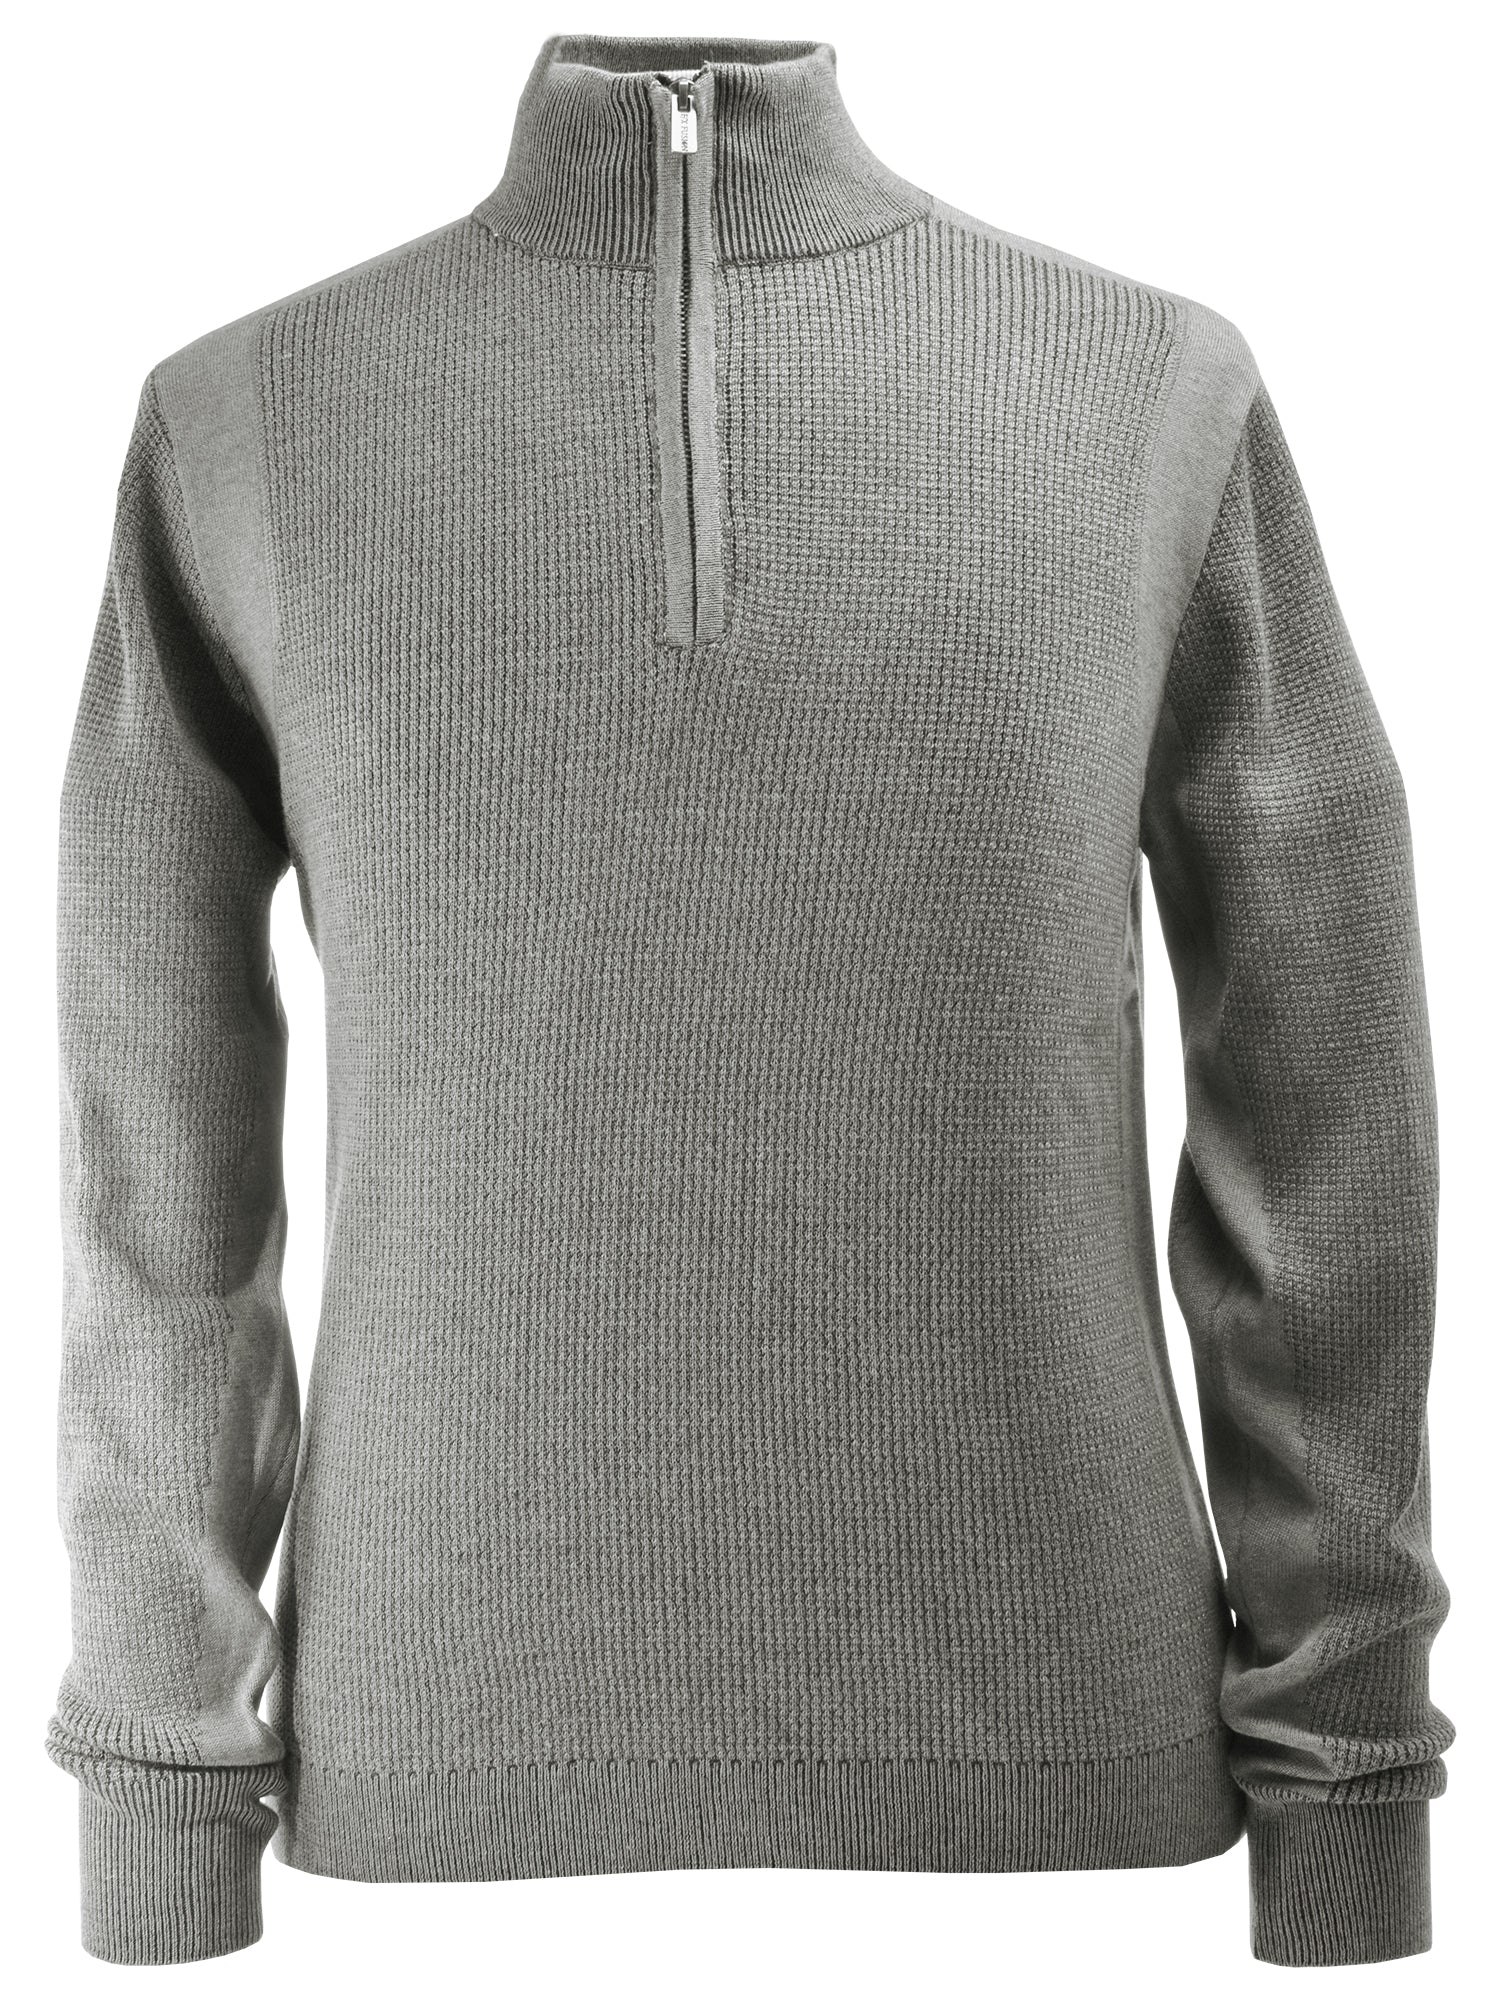 F/X Fusion Plaited Thermal Sweater in Grey